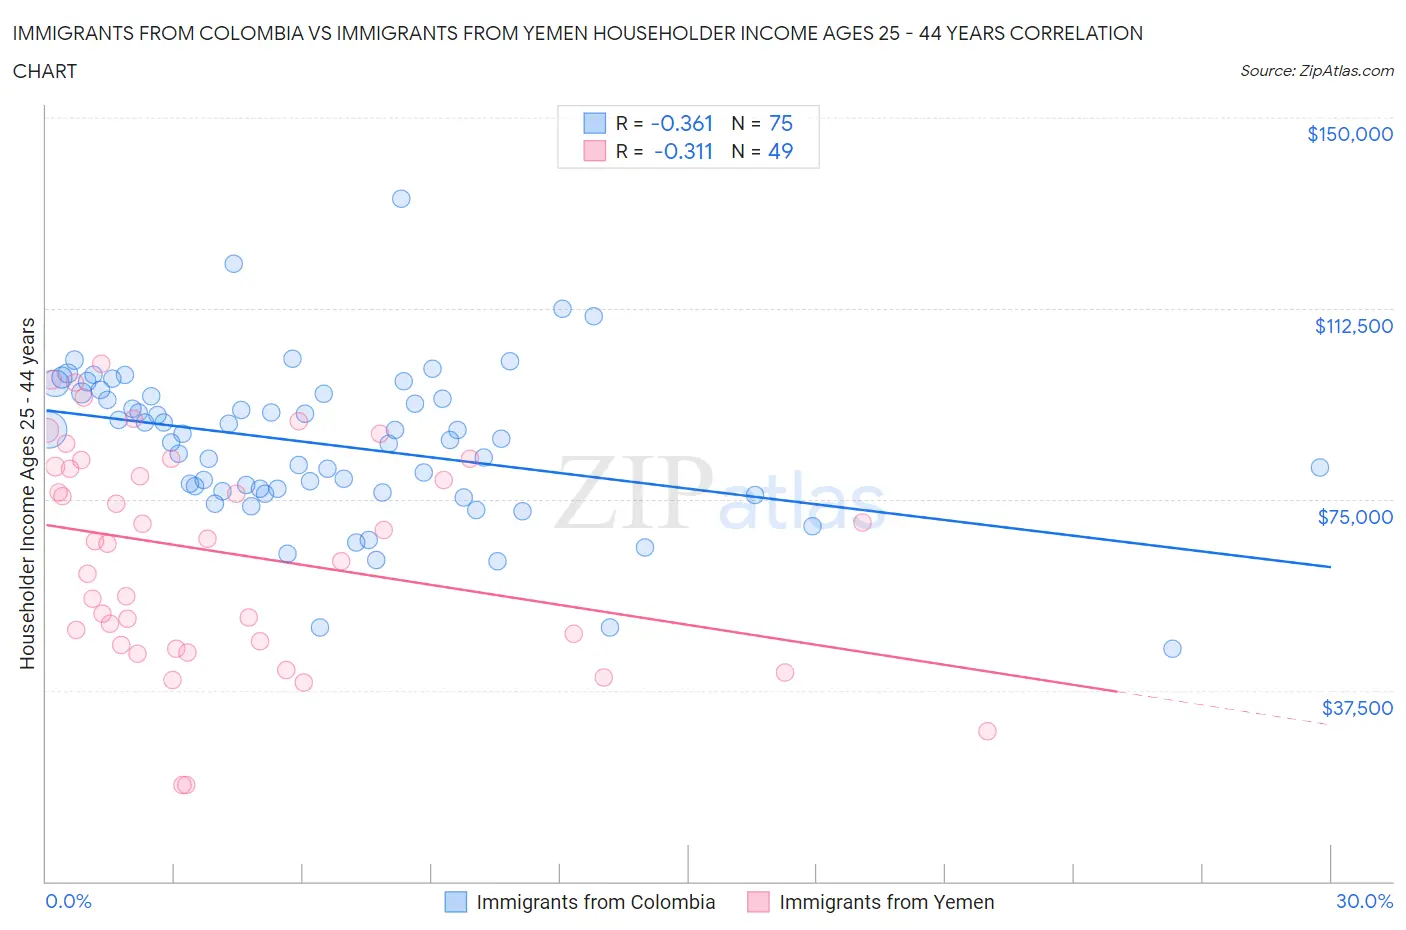 Immigrants from Colombia vs Immigrants from Yemen Householder Income Ages 25 - 44 years